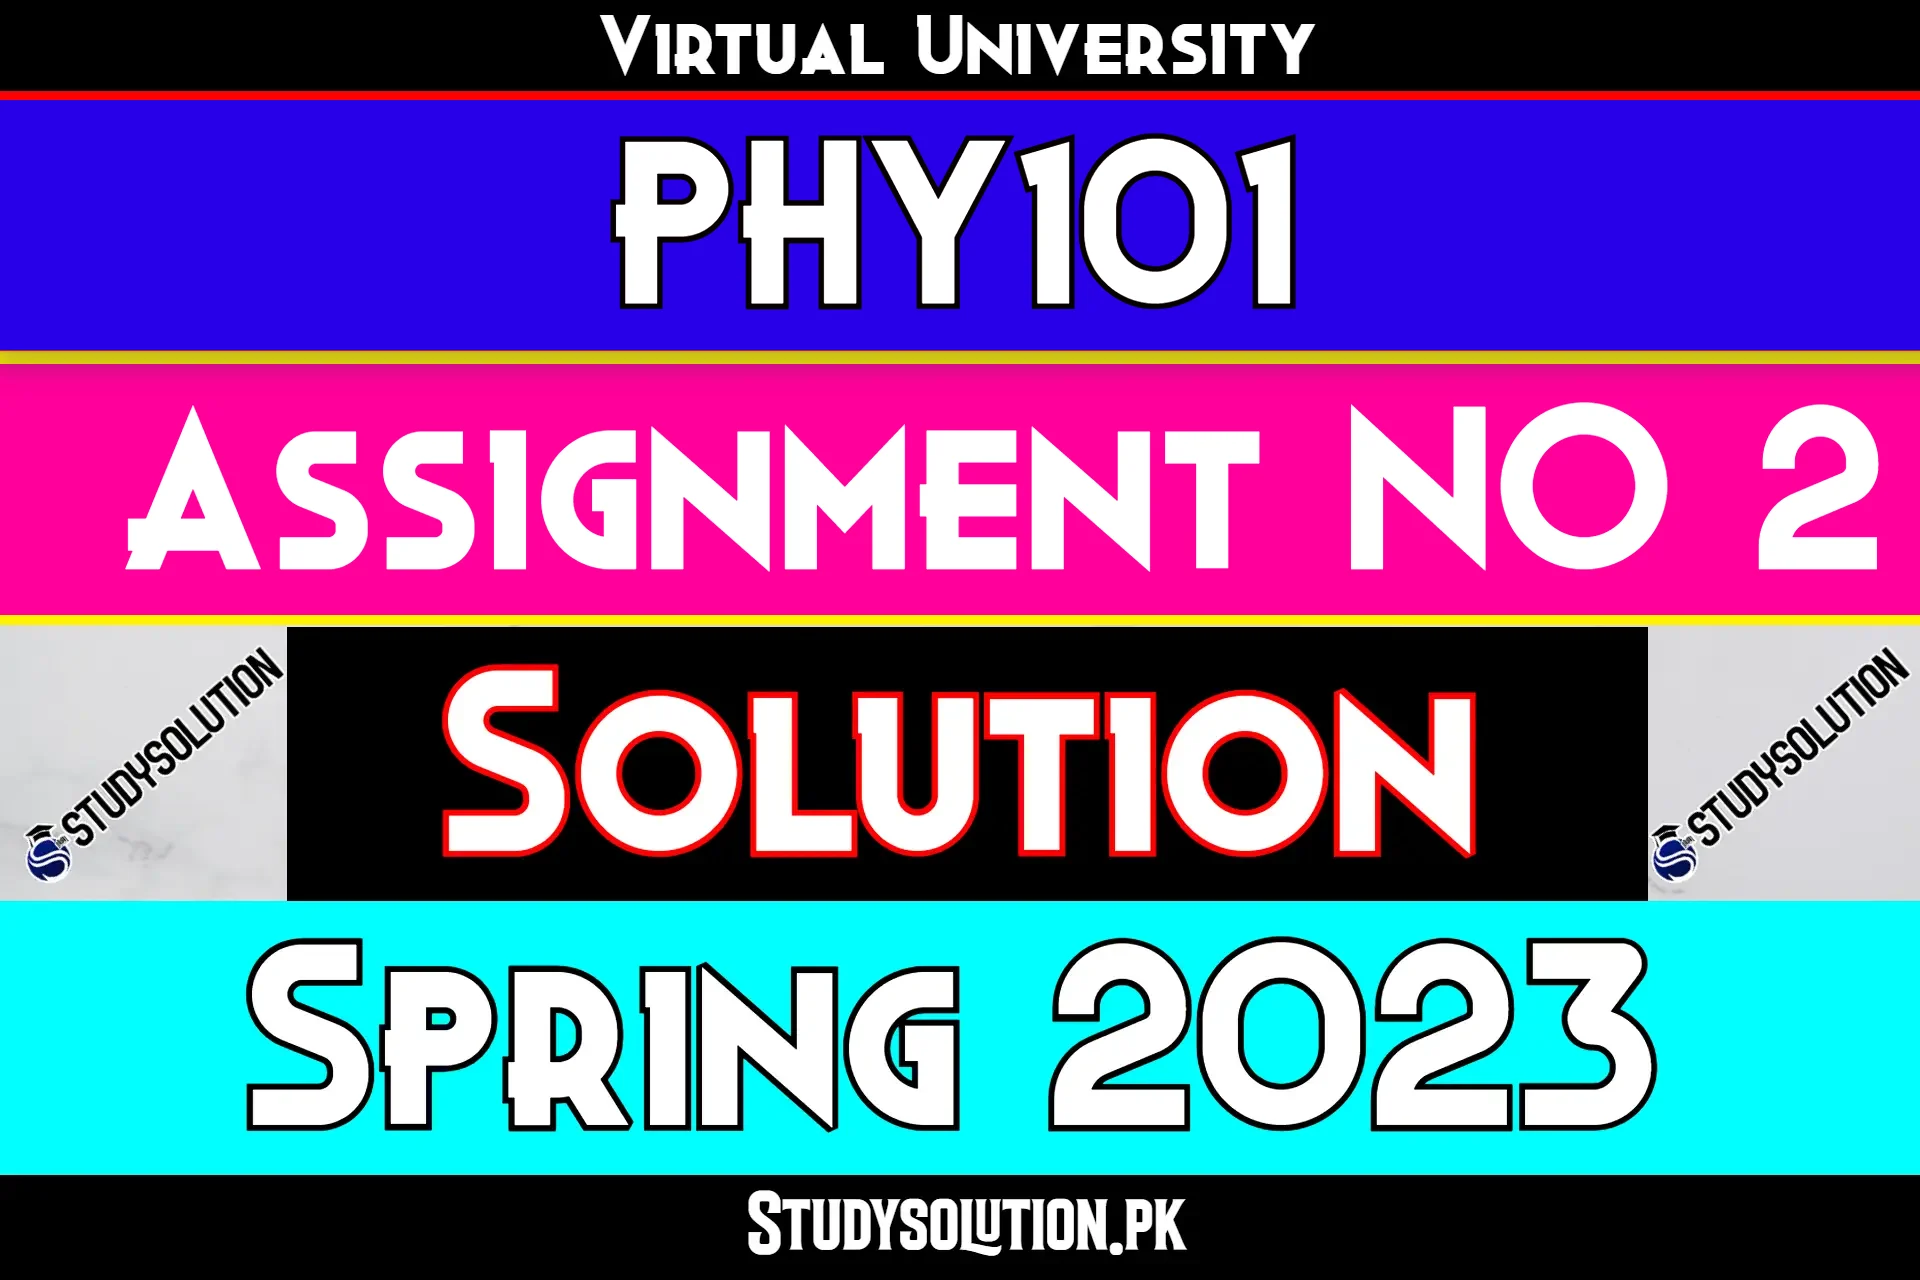 PHY101 Assignment No 2 Solution Spring 2023